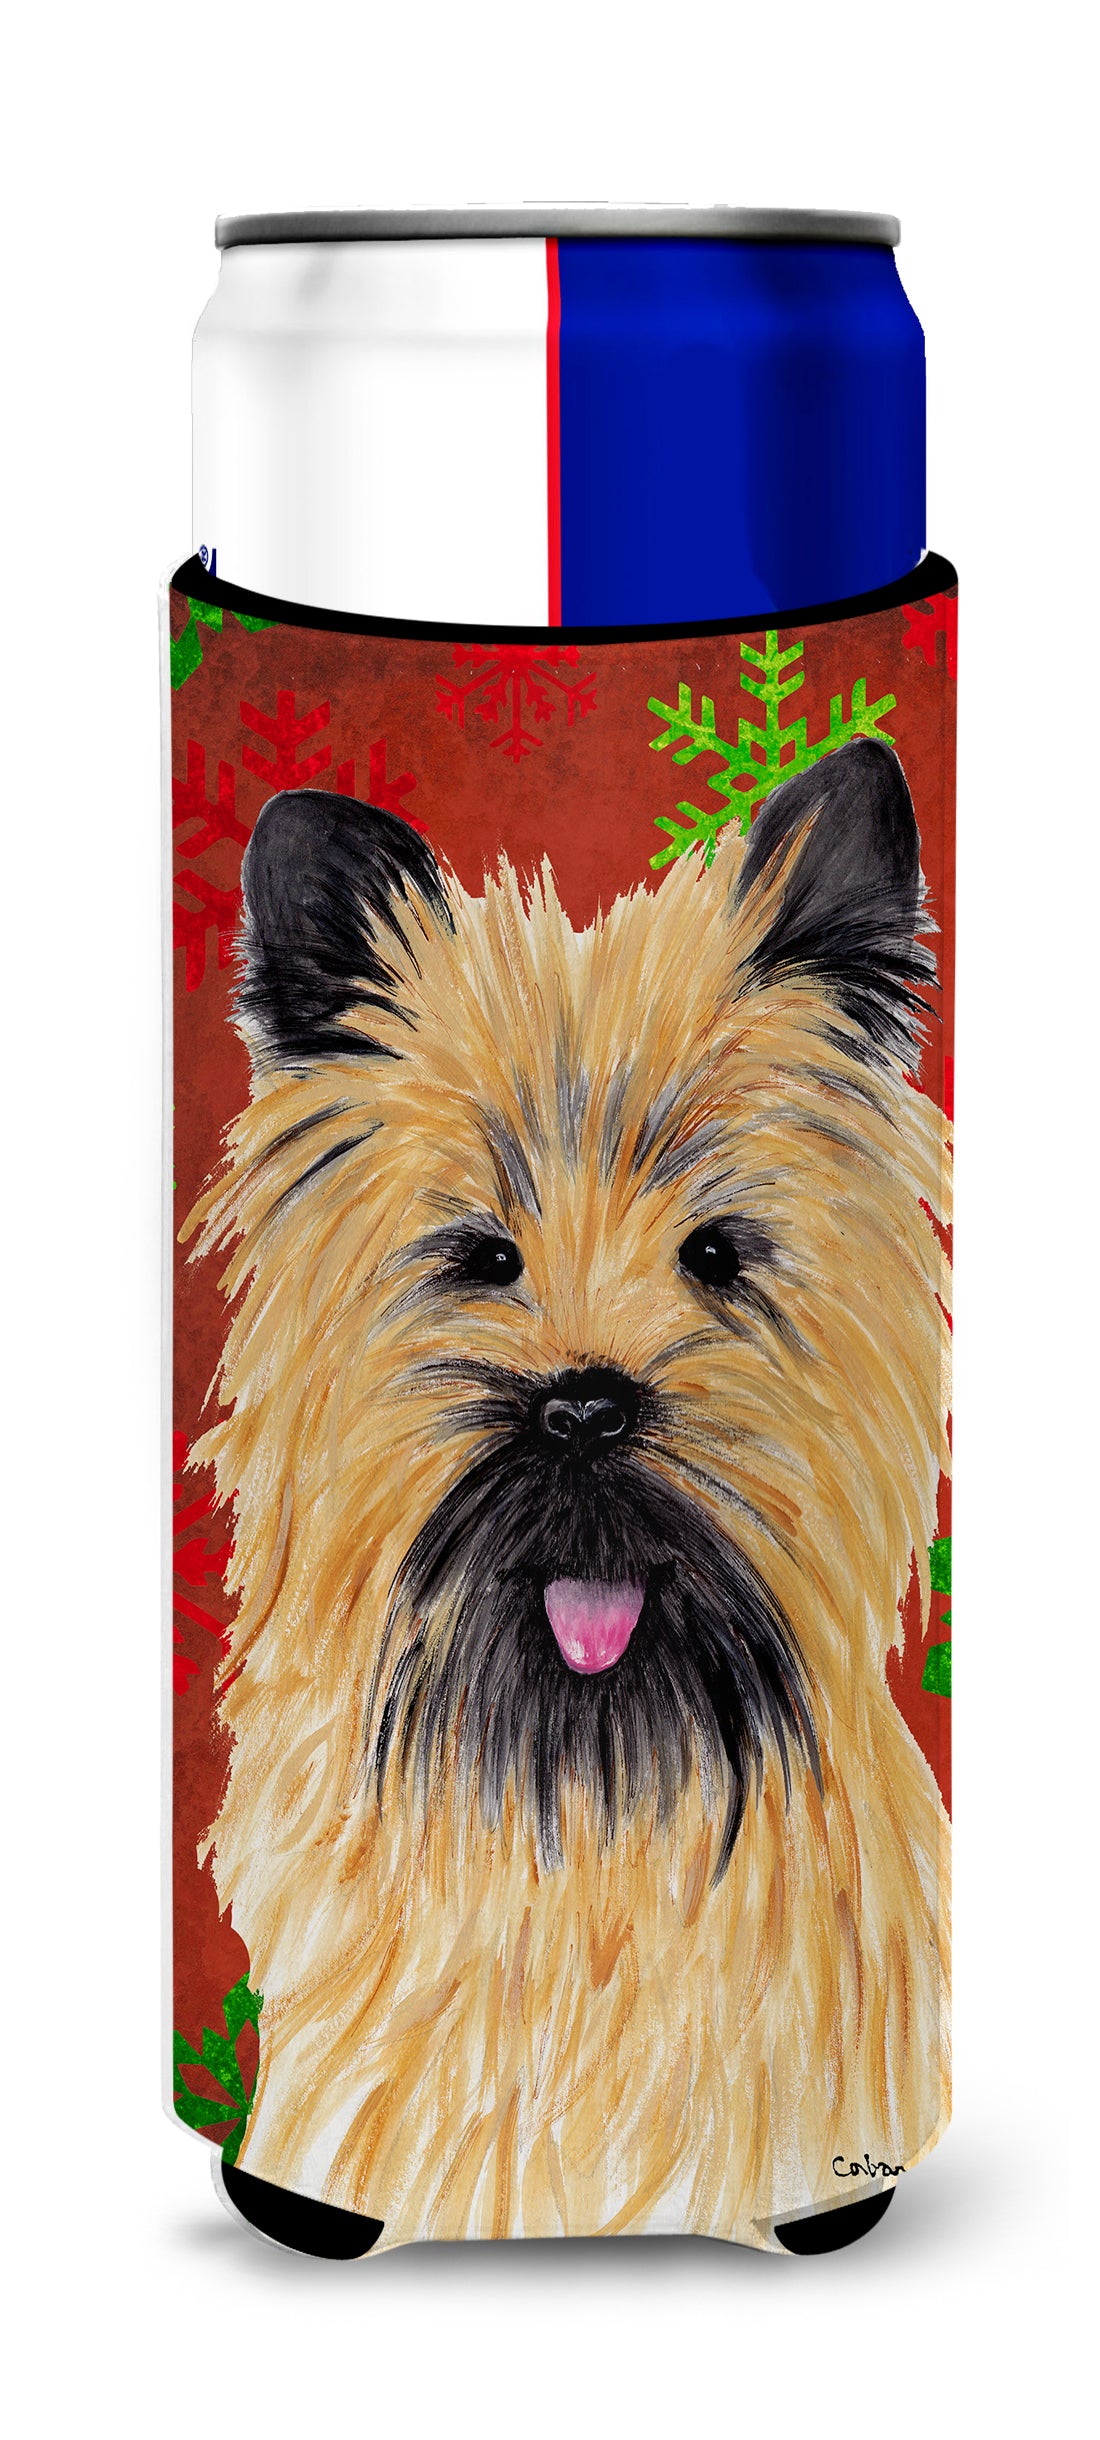 Cairn Terrier Red and Green Snowflakes Holiday Christmas Ultra Beverage Insulators for slim cans SC9415MUK.